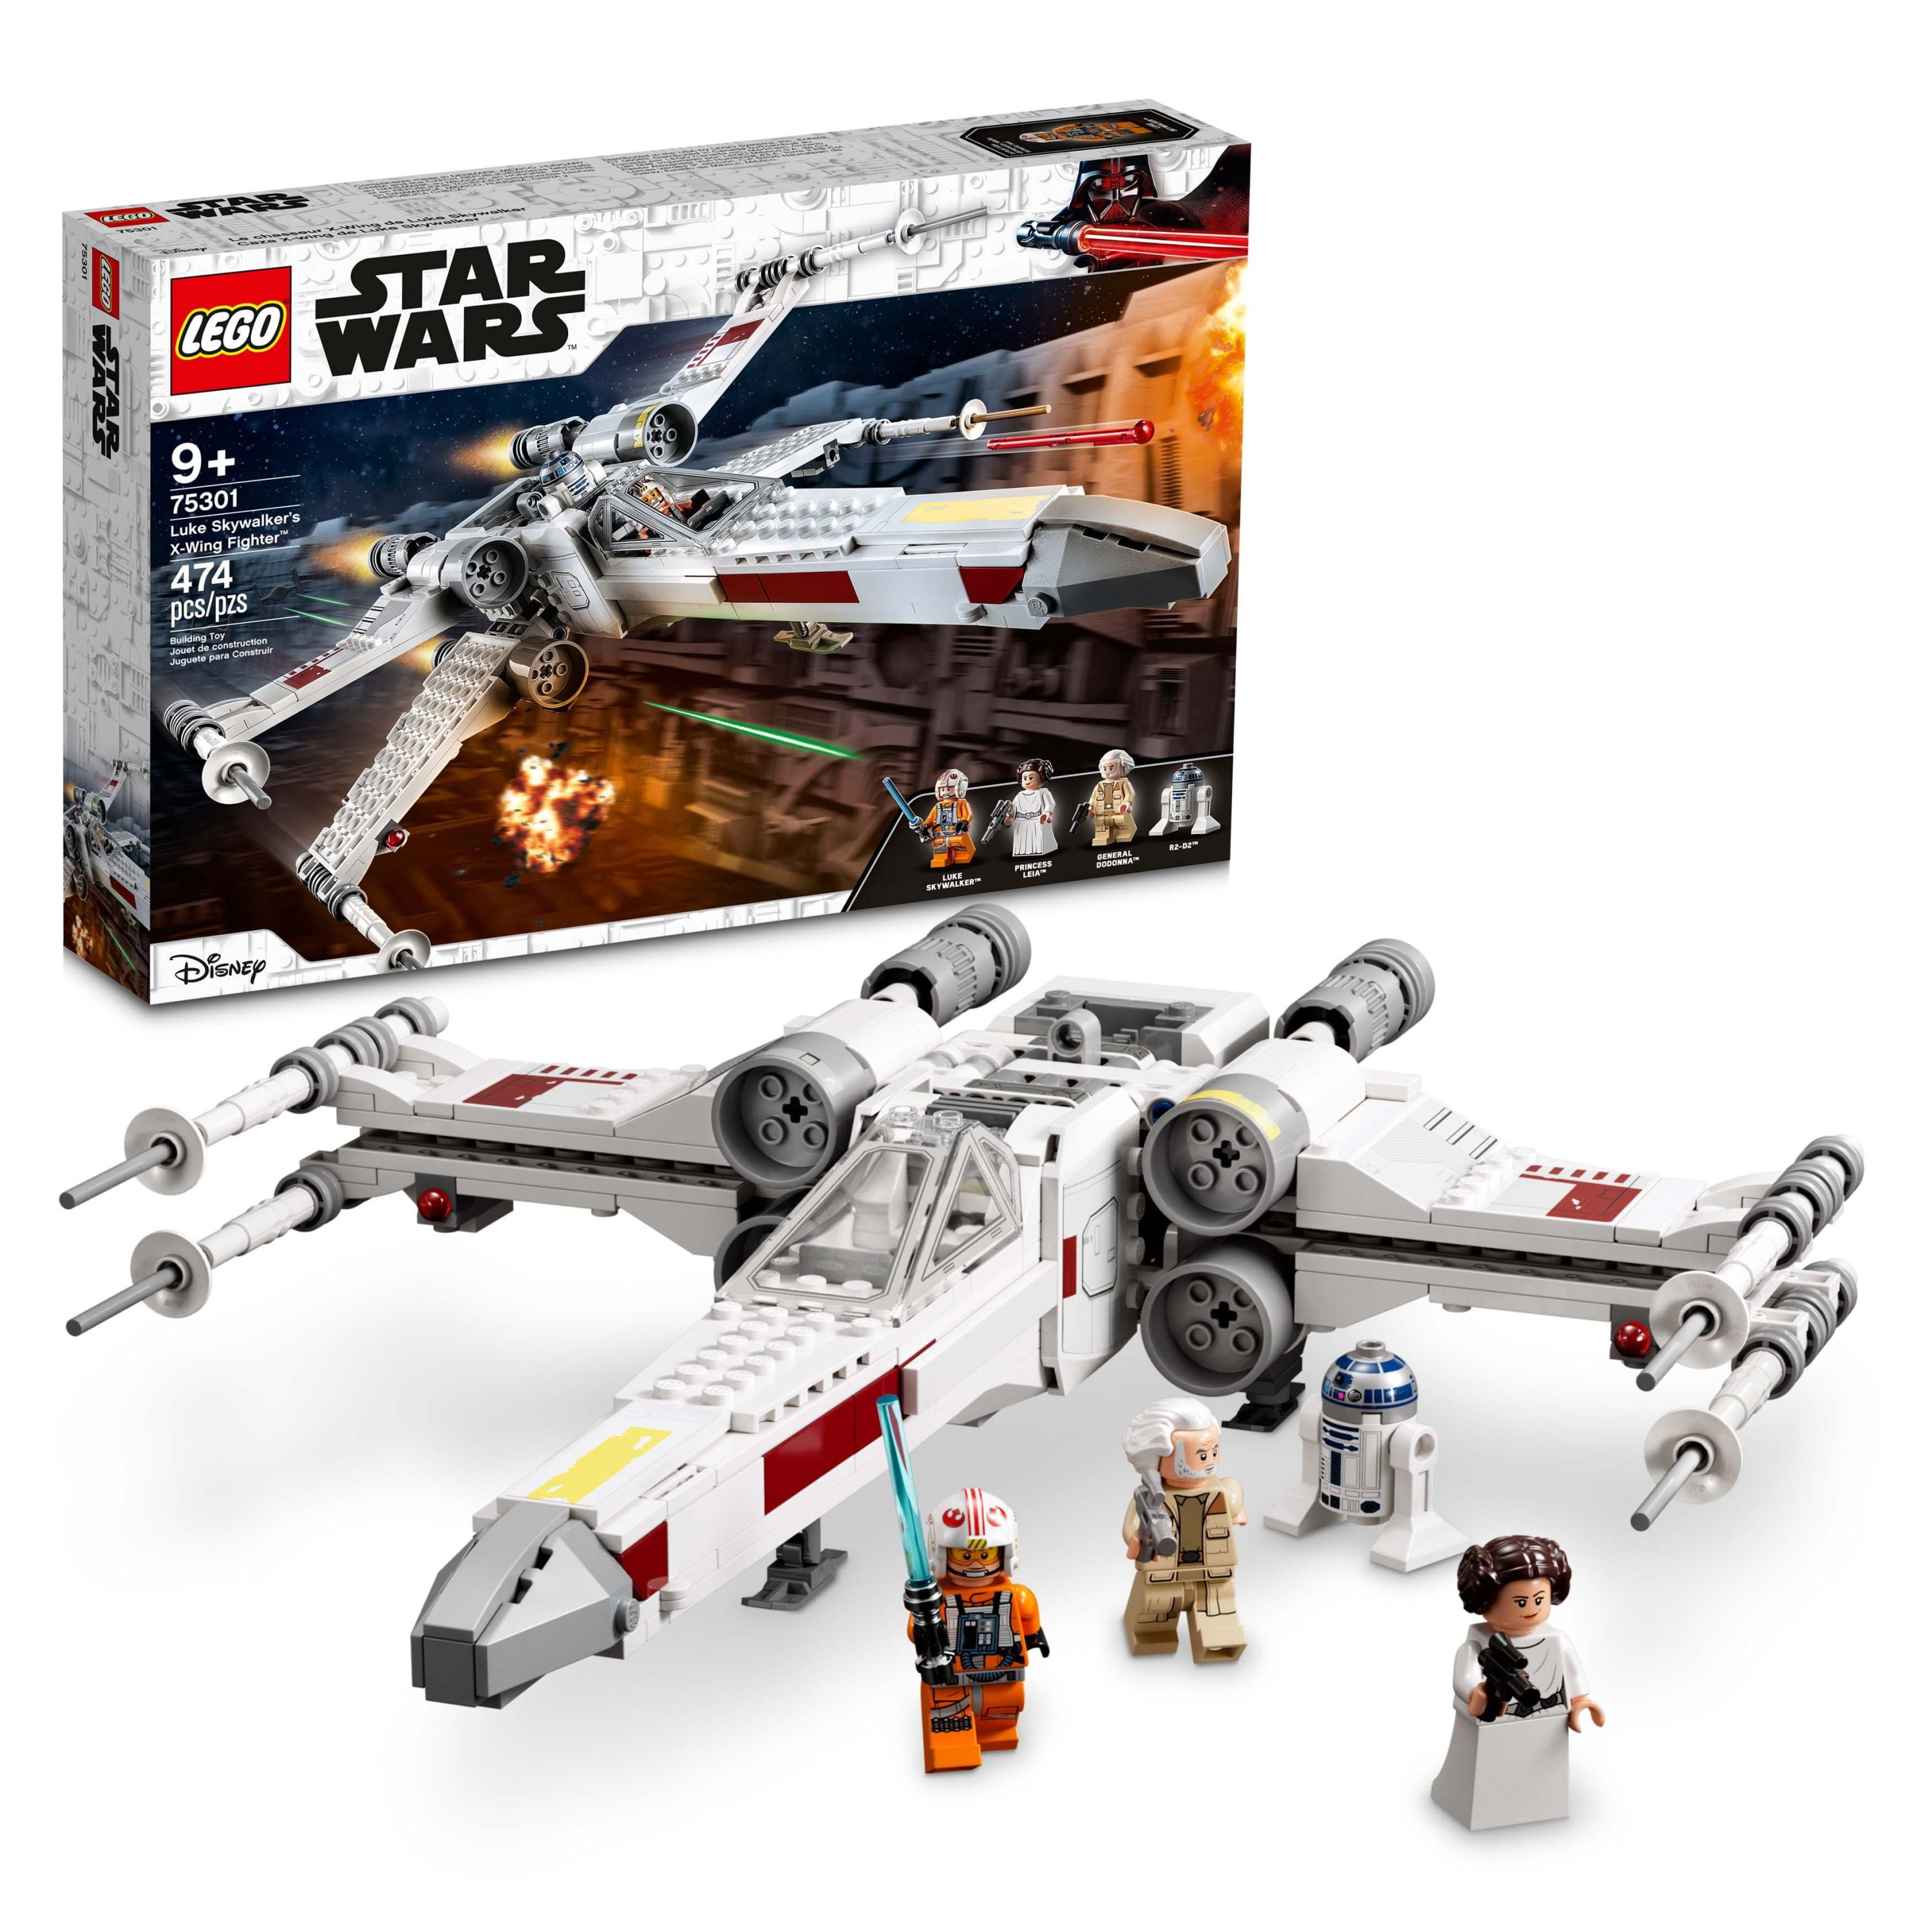 LEGO Star Wars Luke Skywalker's X-Wing Fighter 75301 Building Toy, Gifts for Kids, Boys & Girls with Princess Leia Minifigure and R2-D2 Droid Figure